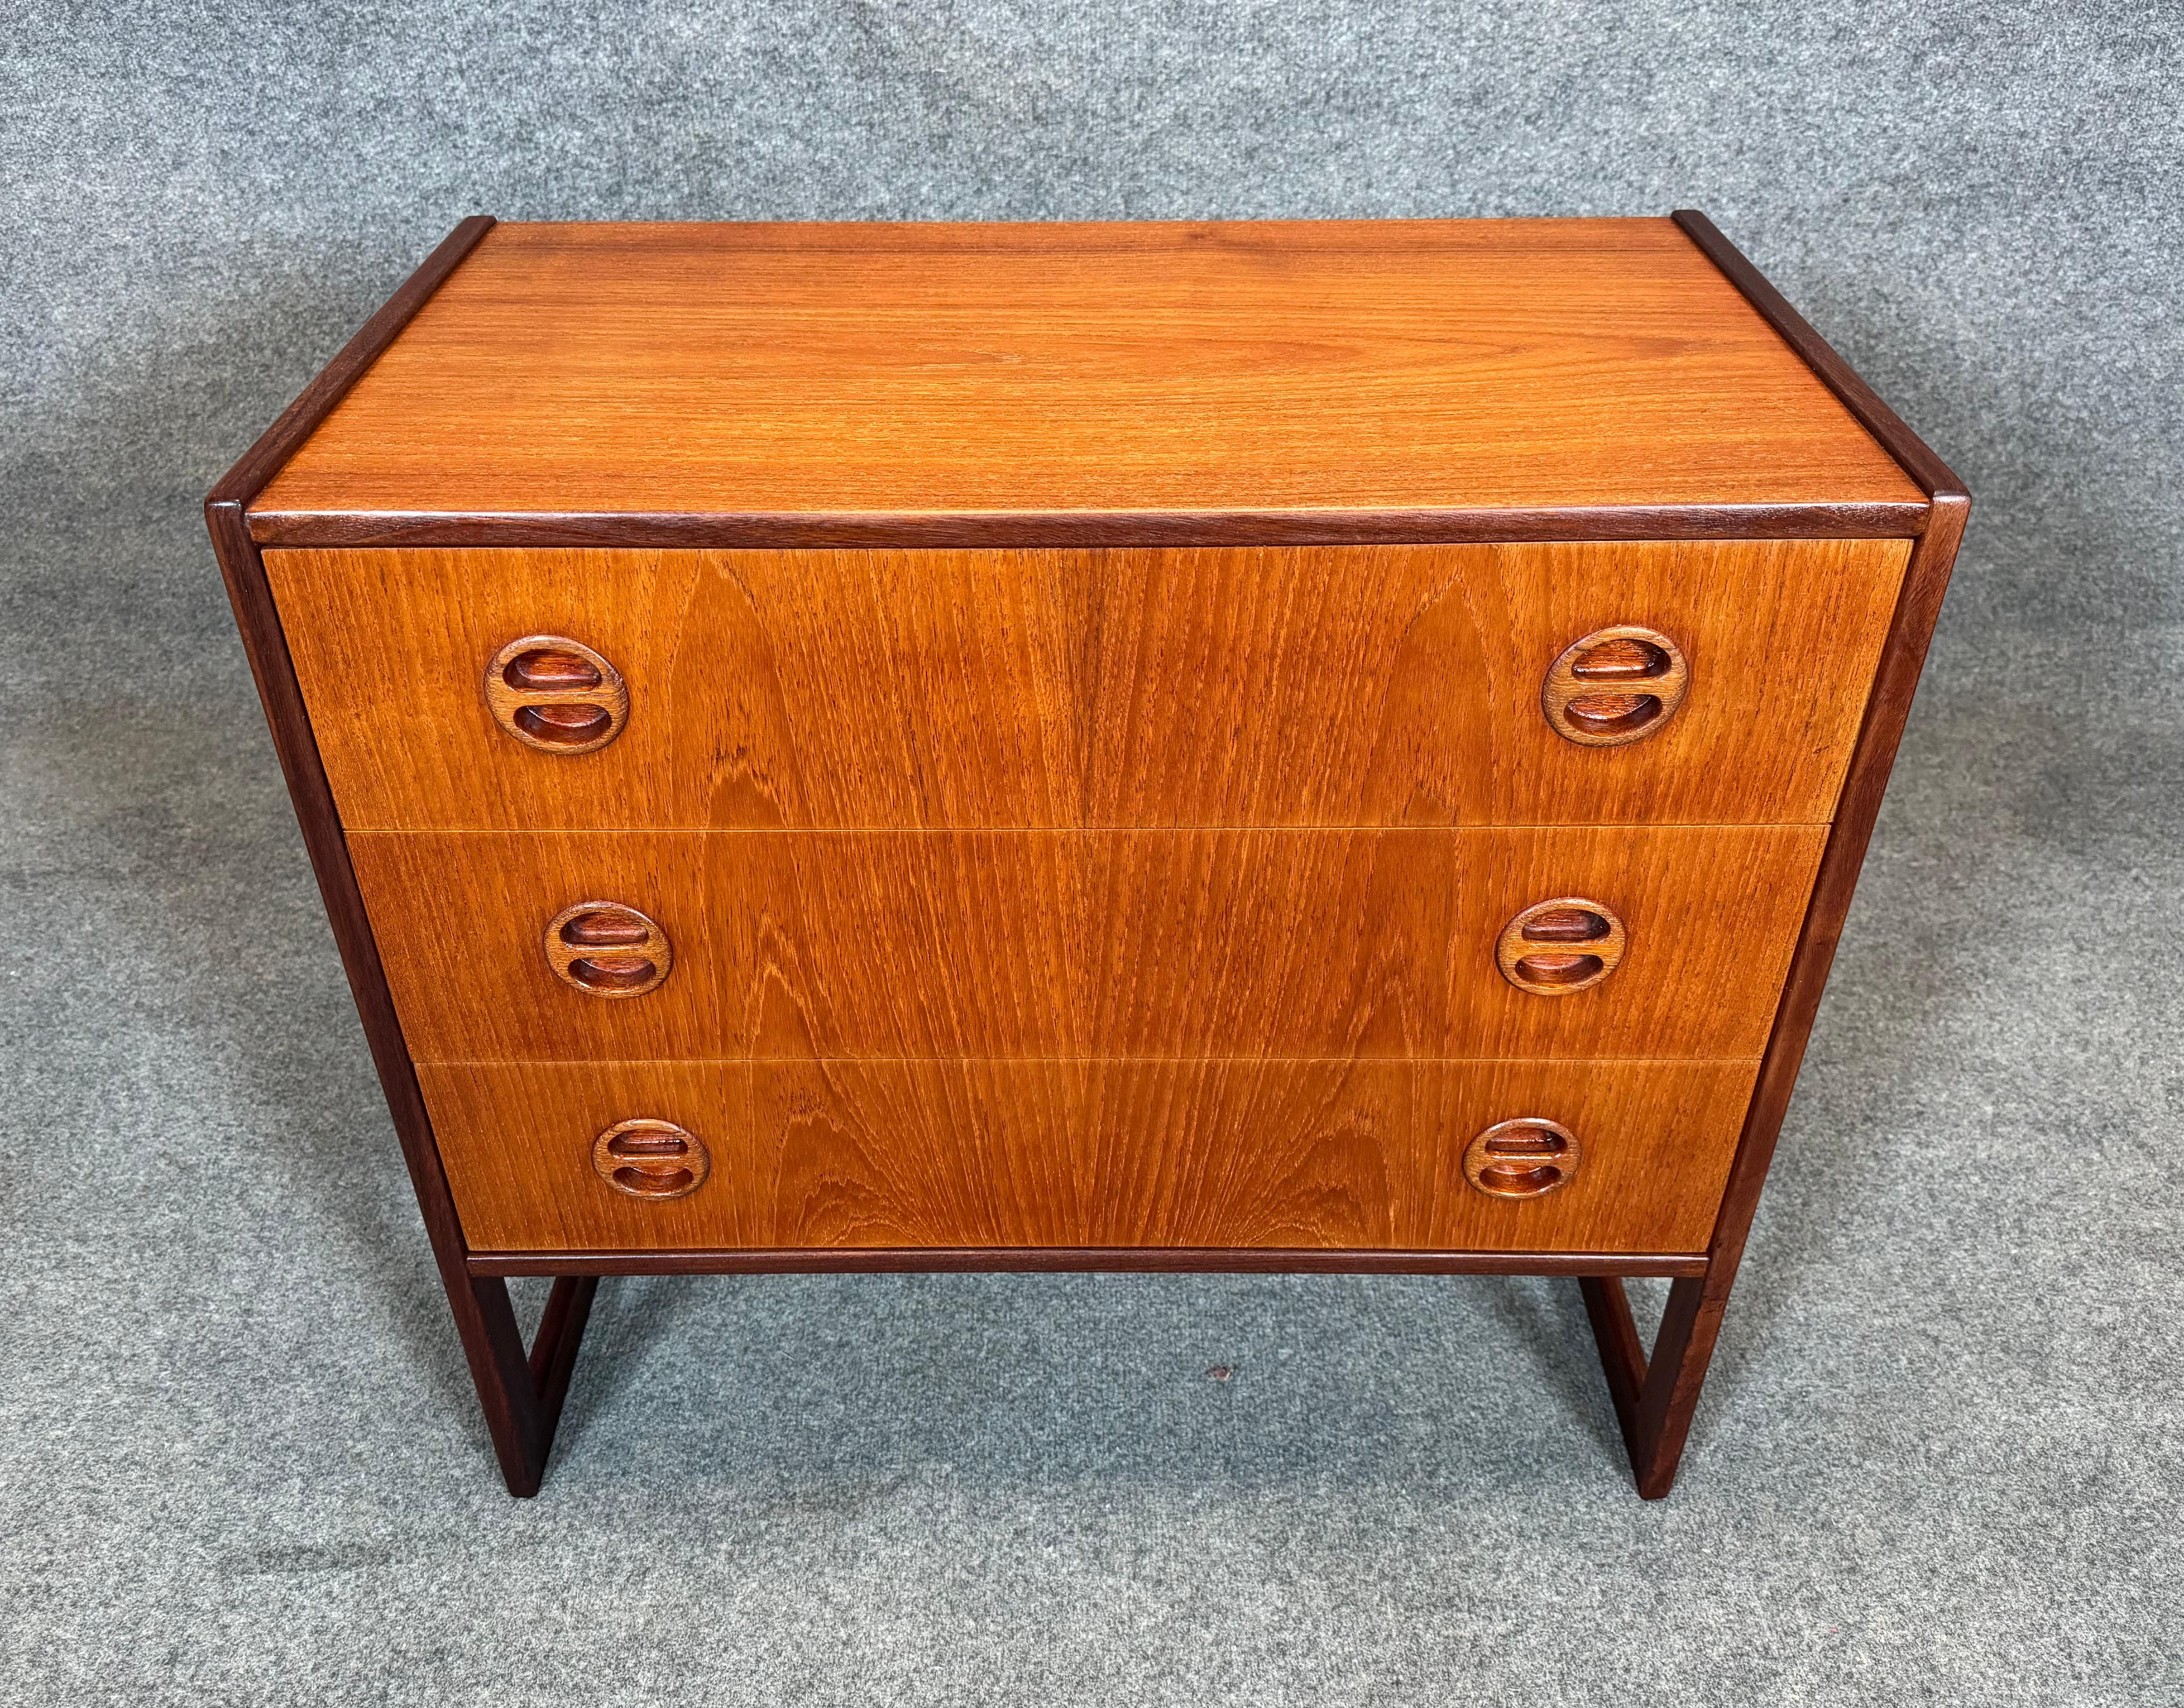 Here is a beautiful scandinavian modern low chest of drawer in teak designed by Arne Wahl Iversen , manufactured in Sweden and retailed at IKEA in the 1960's in Sweden.
This lowboy, recently imported Fromm Europe to California before its